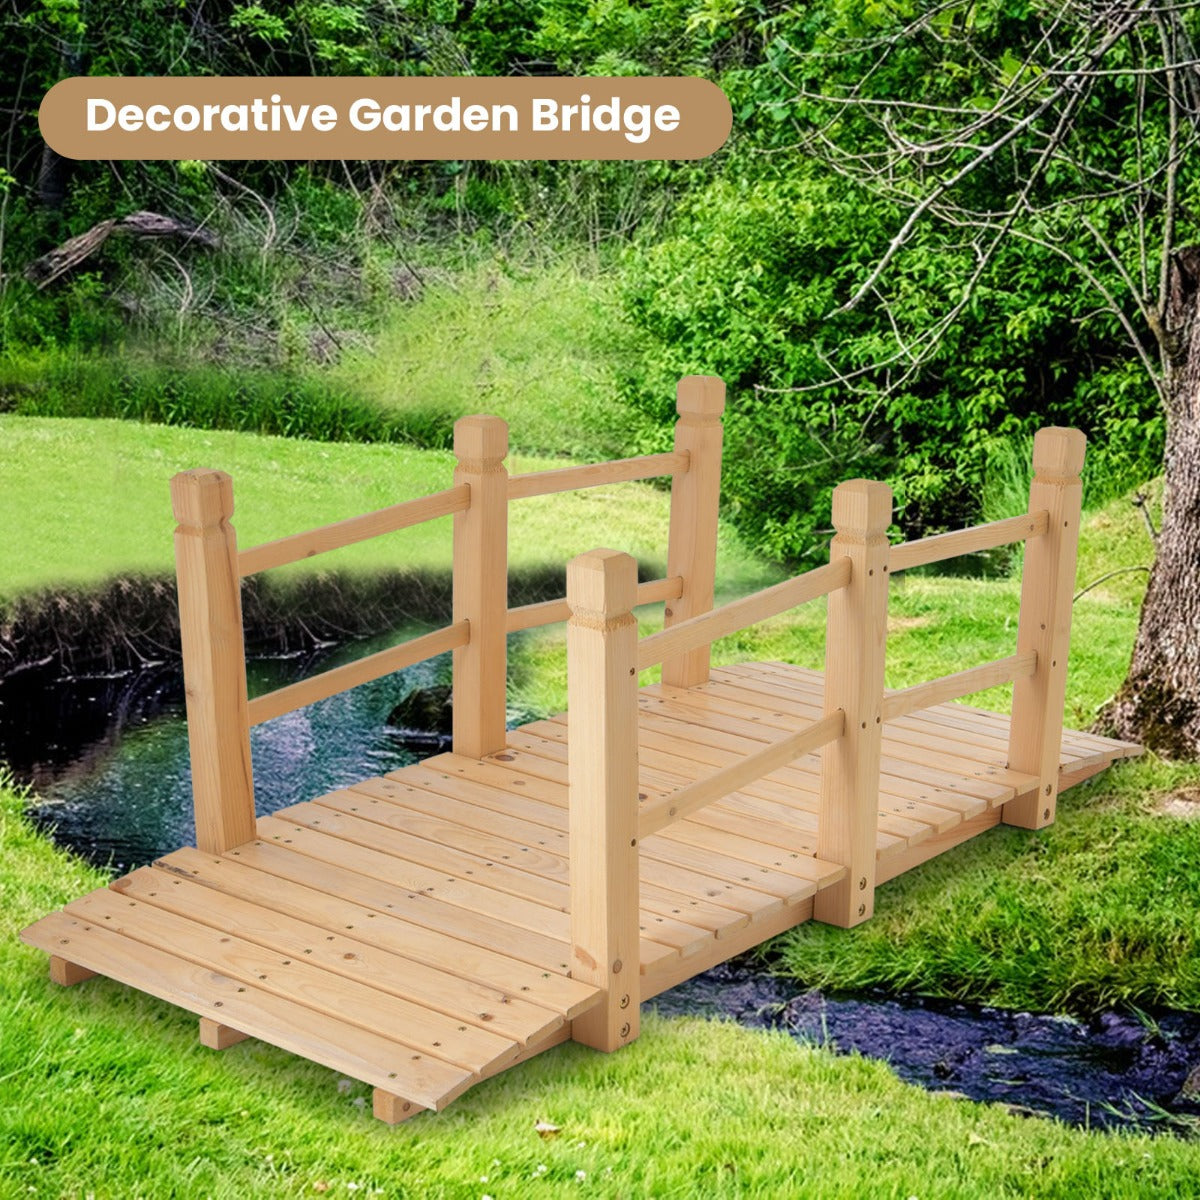 150 cm Wooden Garden Bridge with Double Safety Rails for Backyard Gravel Road-Natural